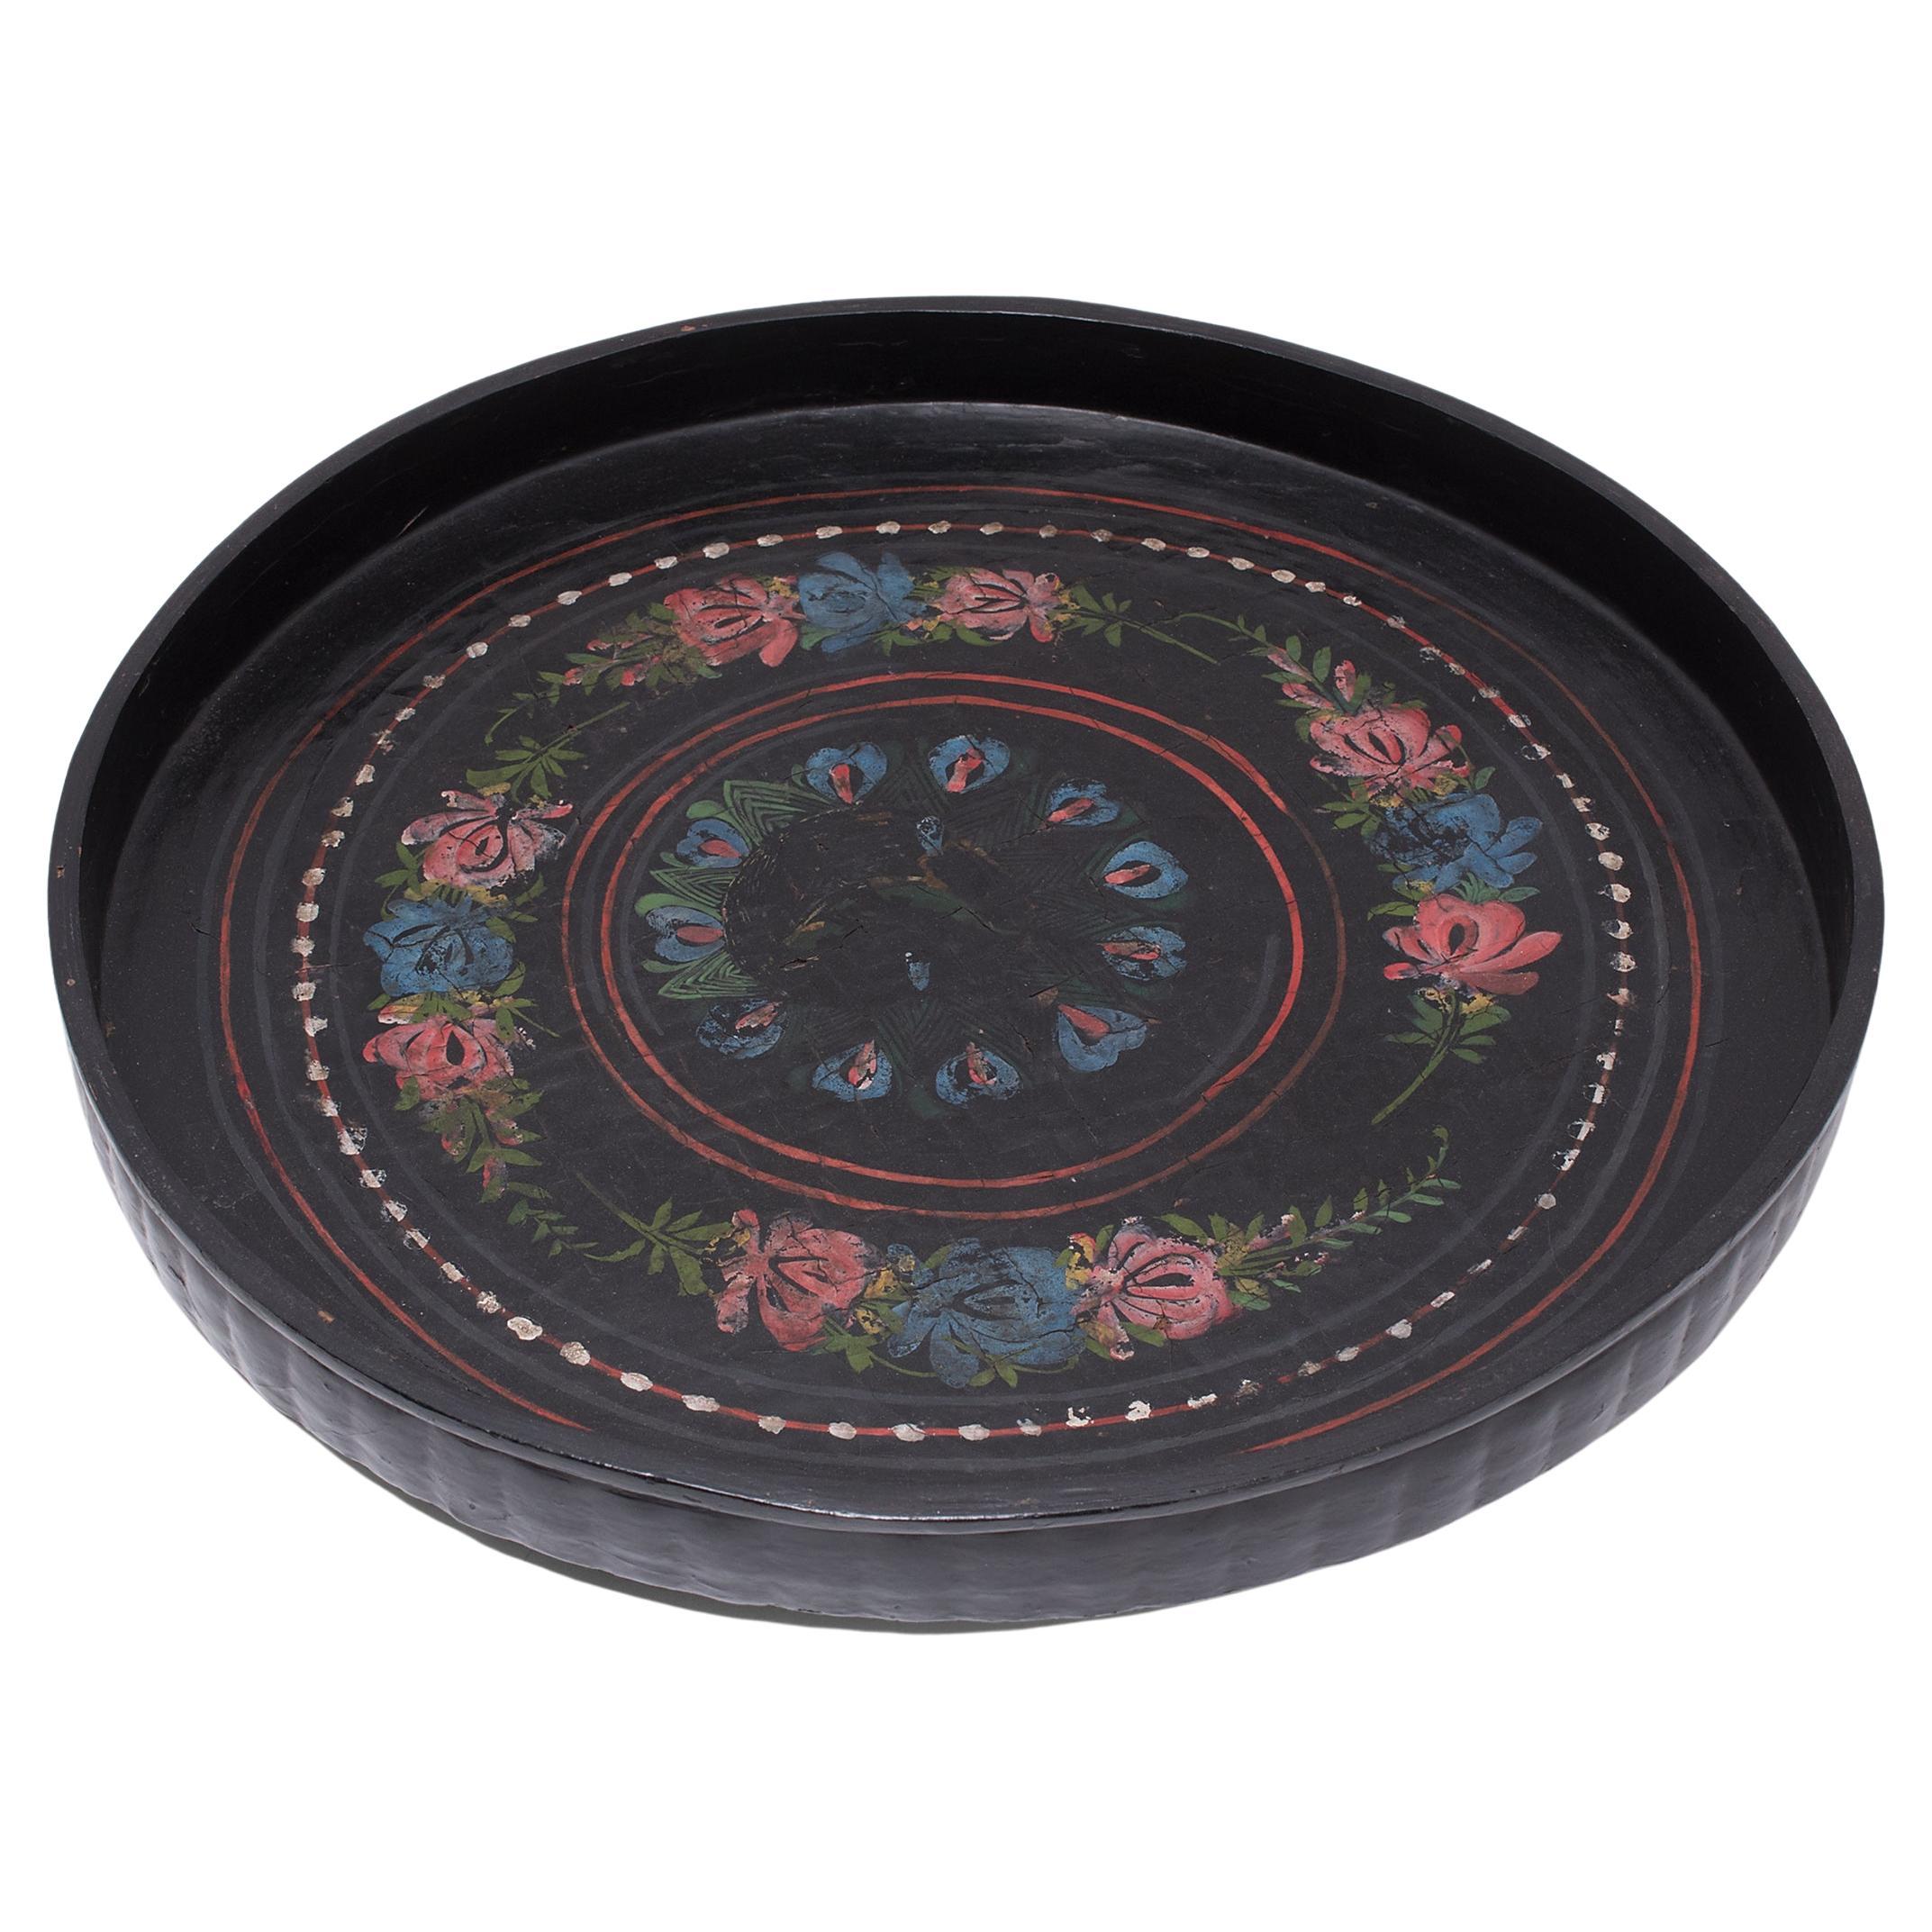 Painted Black Lacquer Round Tray